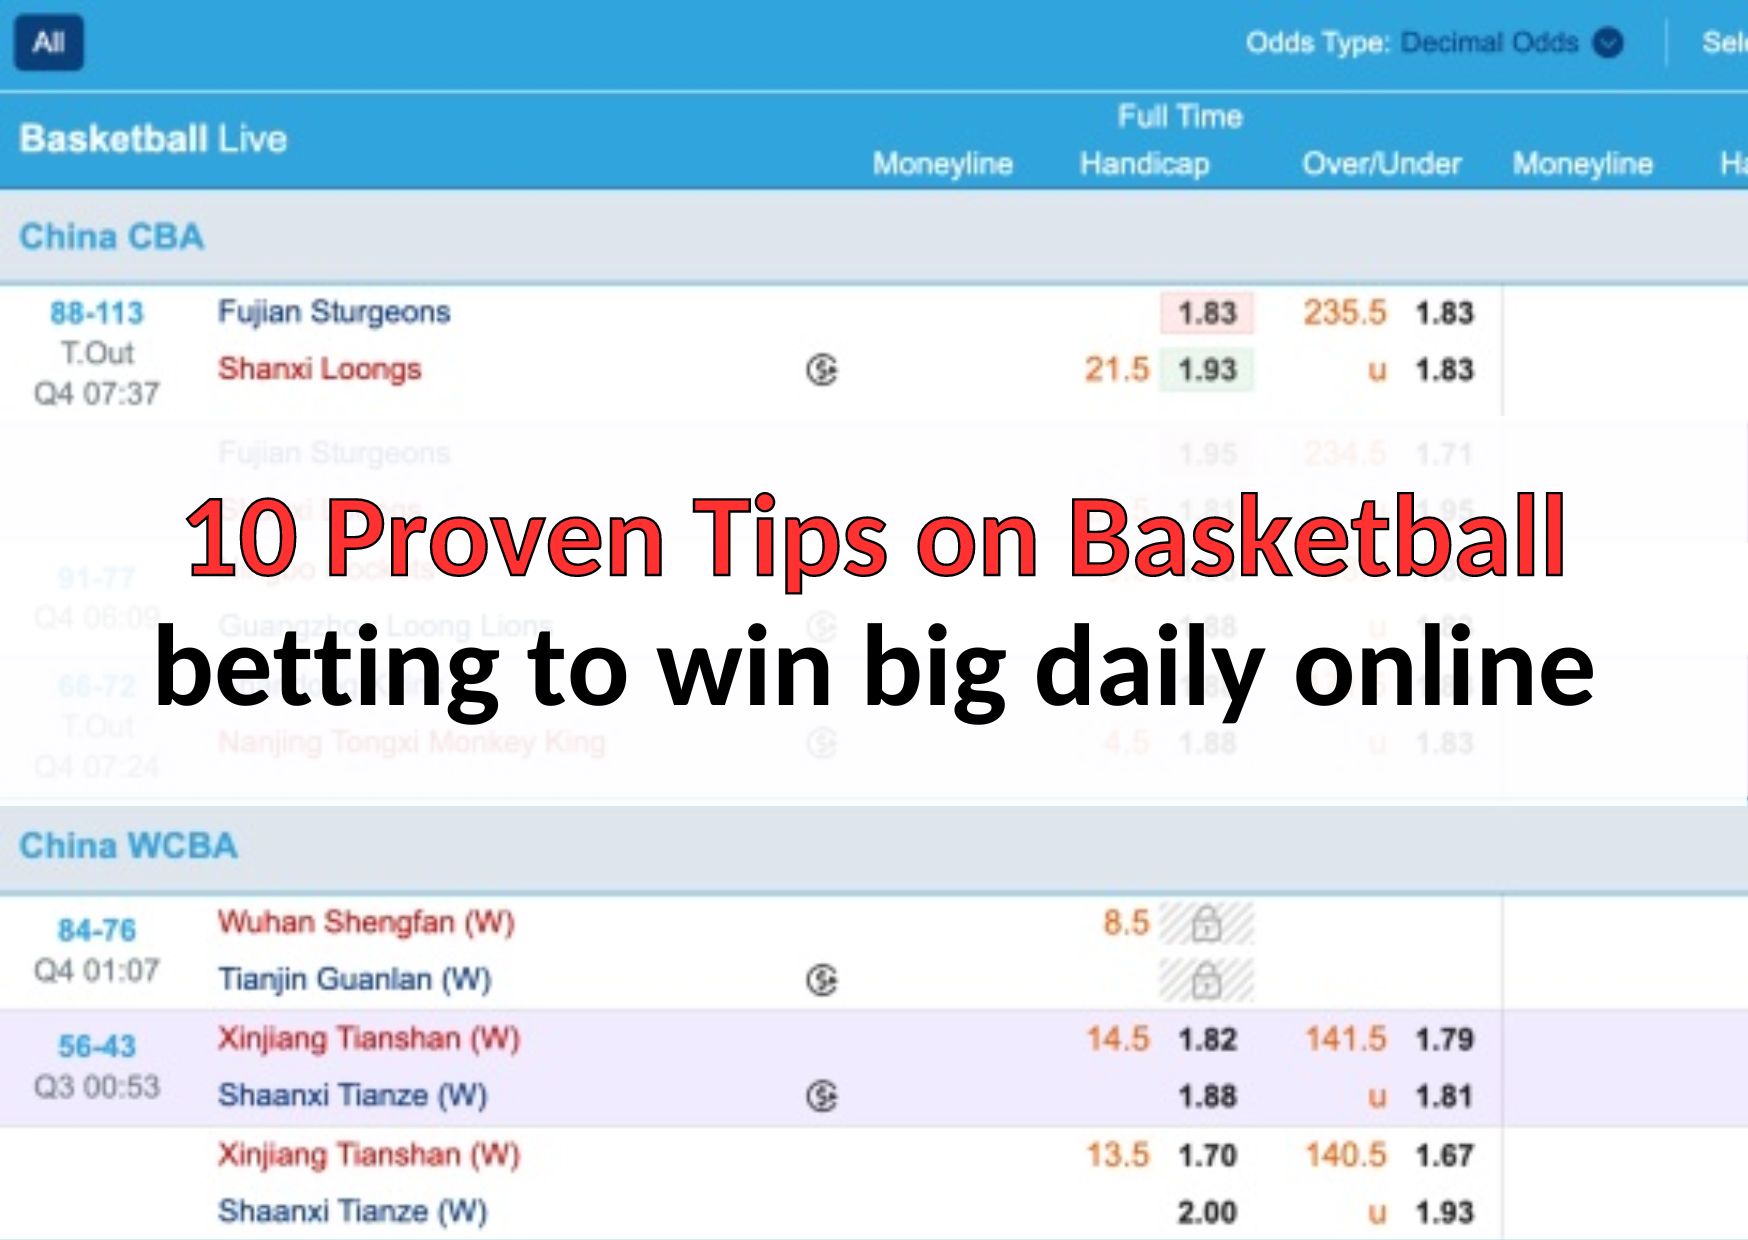 10 Proven Tips on Basketball betting to win big daily online